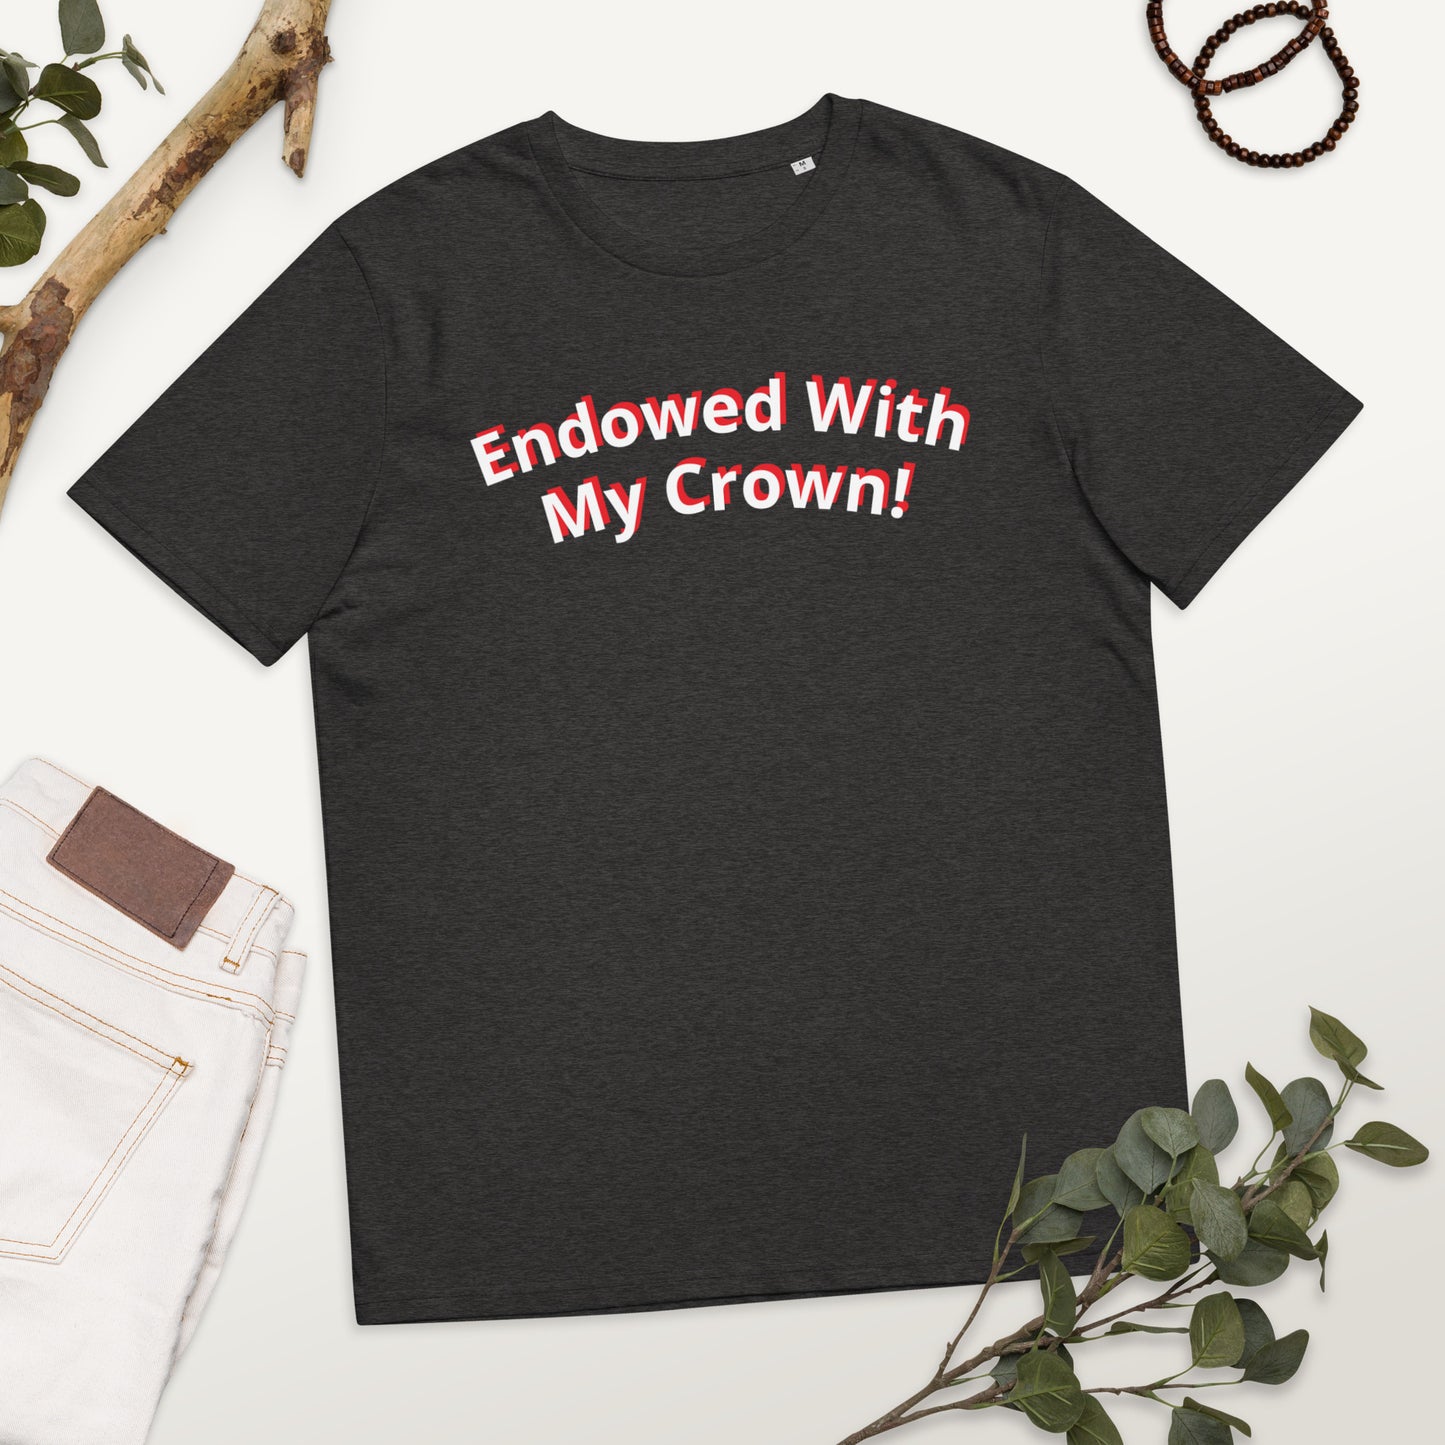 Endowed With My Crown! Unisex organic cotton t-shirt